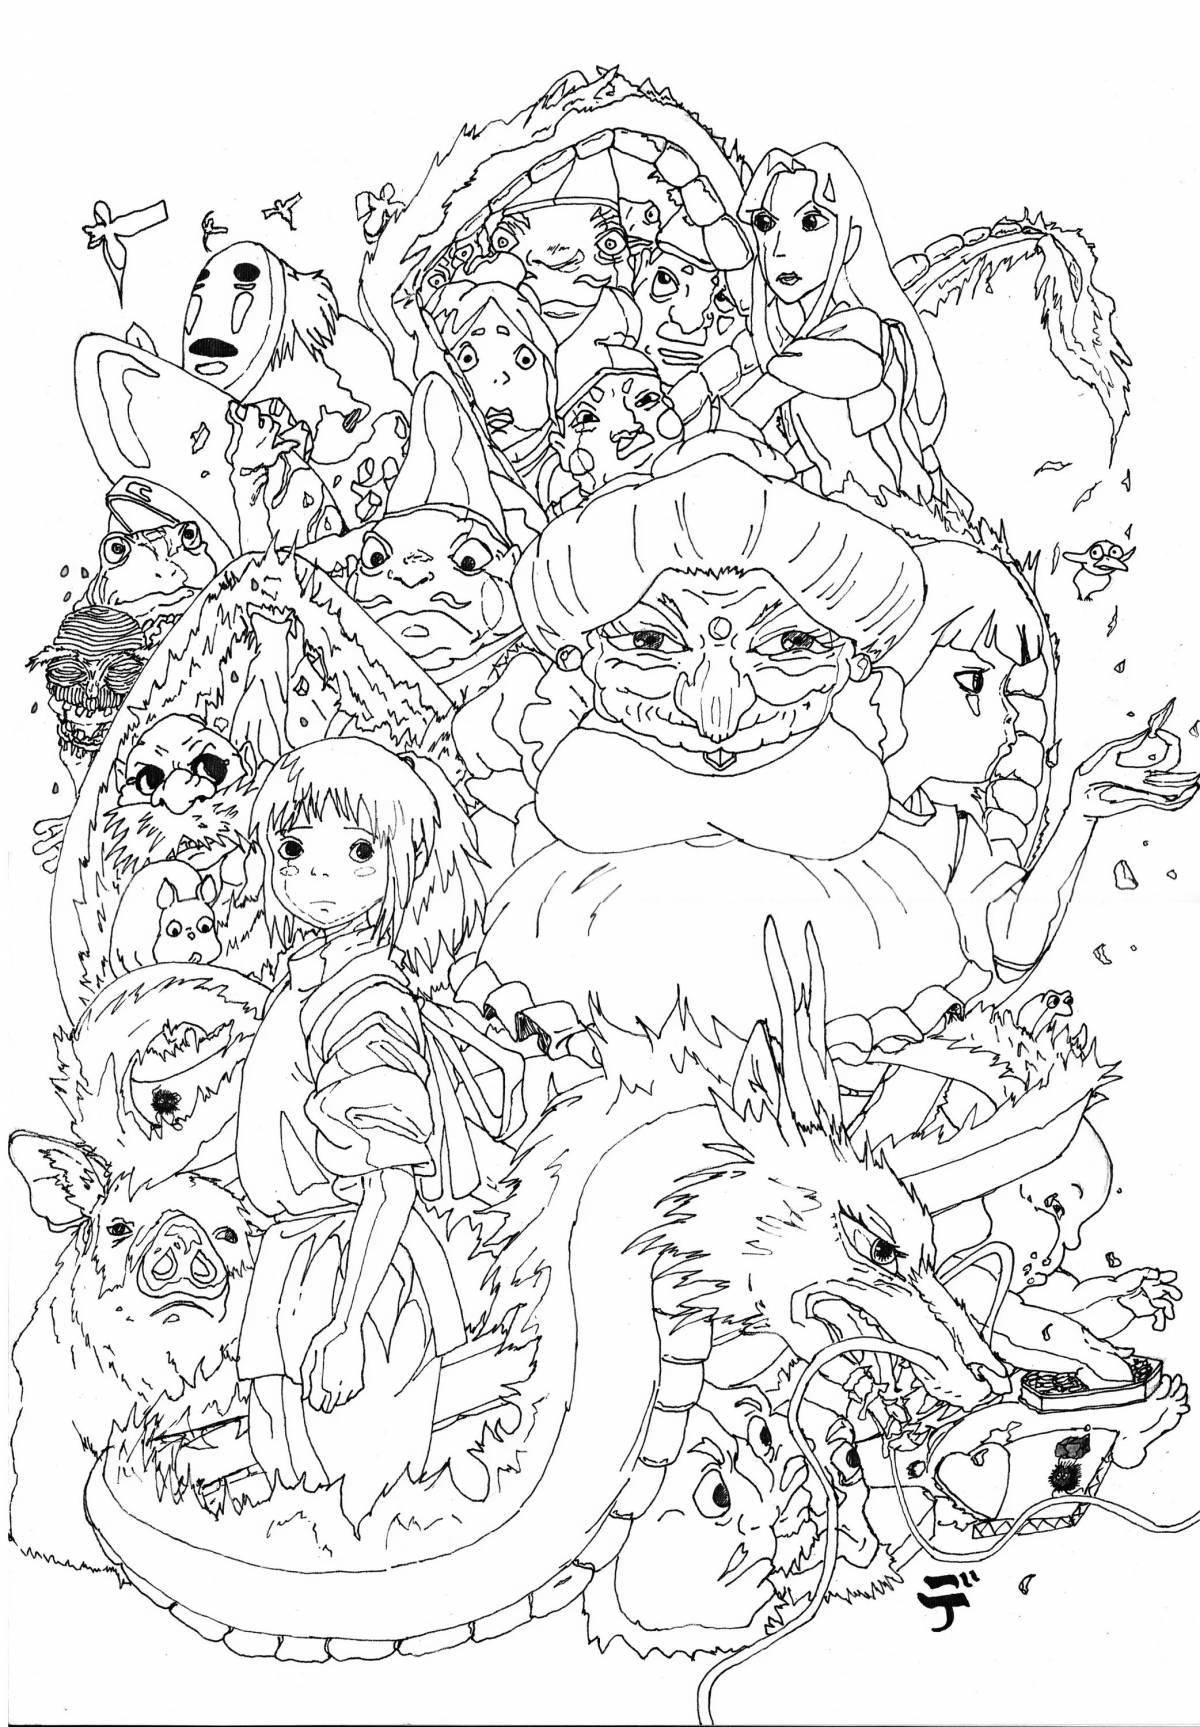 Deluxe howl's moving castle anime coloring book